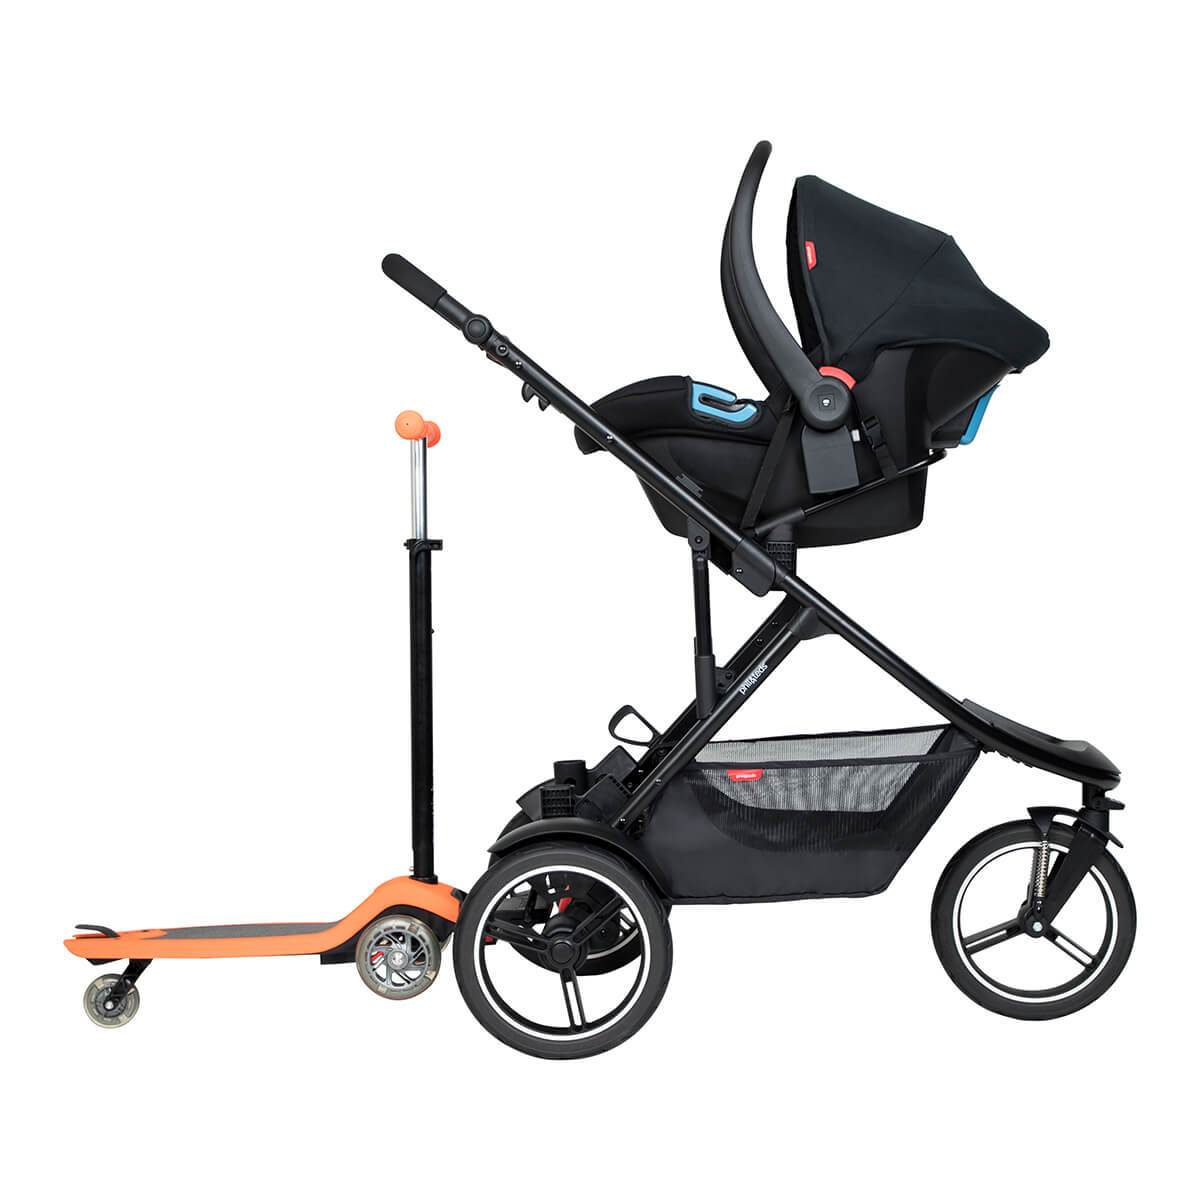 stroller with carseat travel system attached and freerider scooter - philandteds dash pram